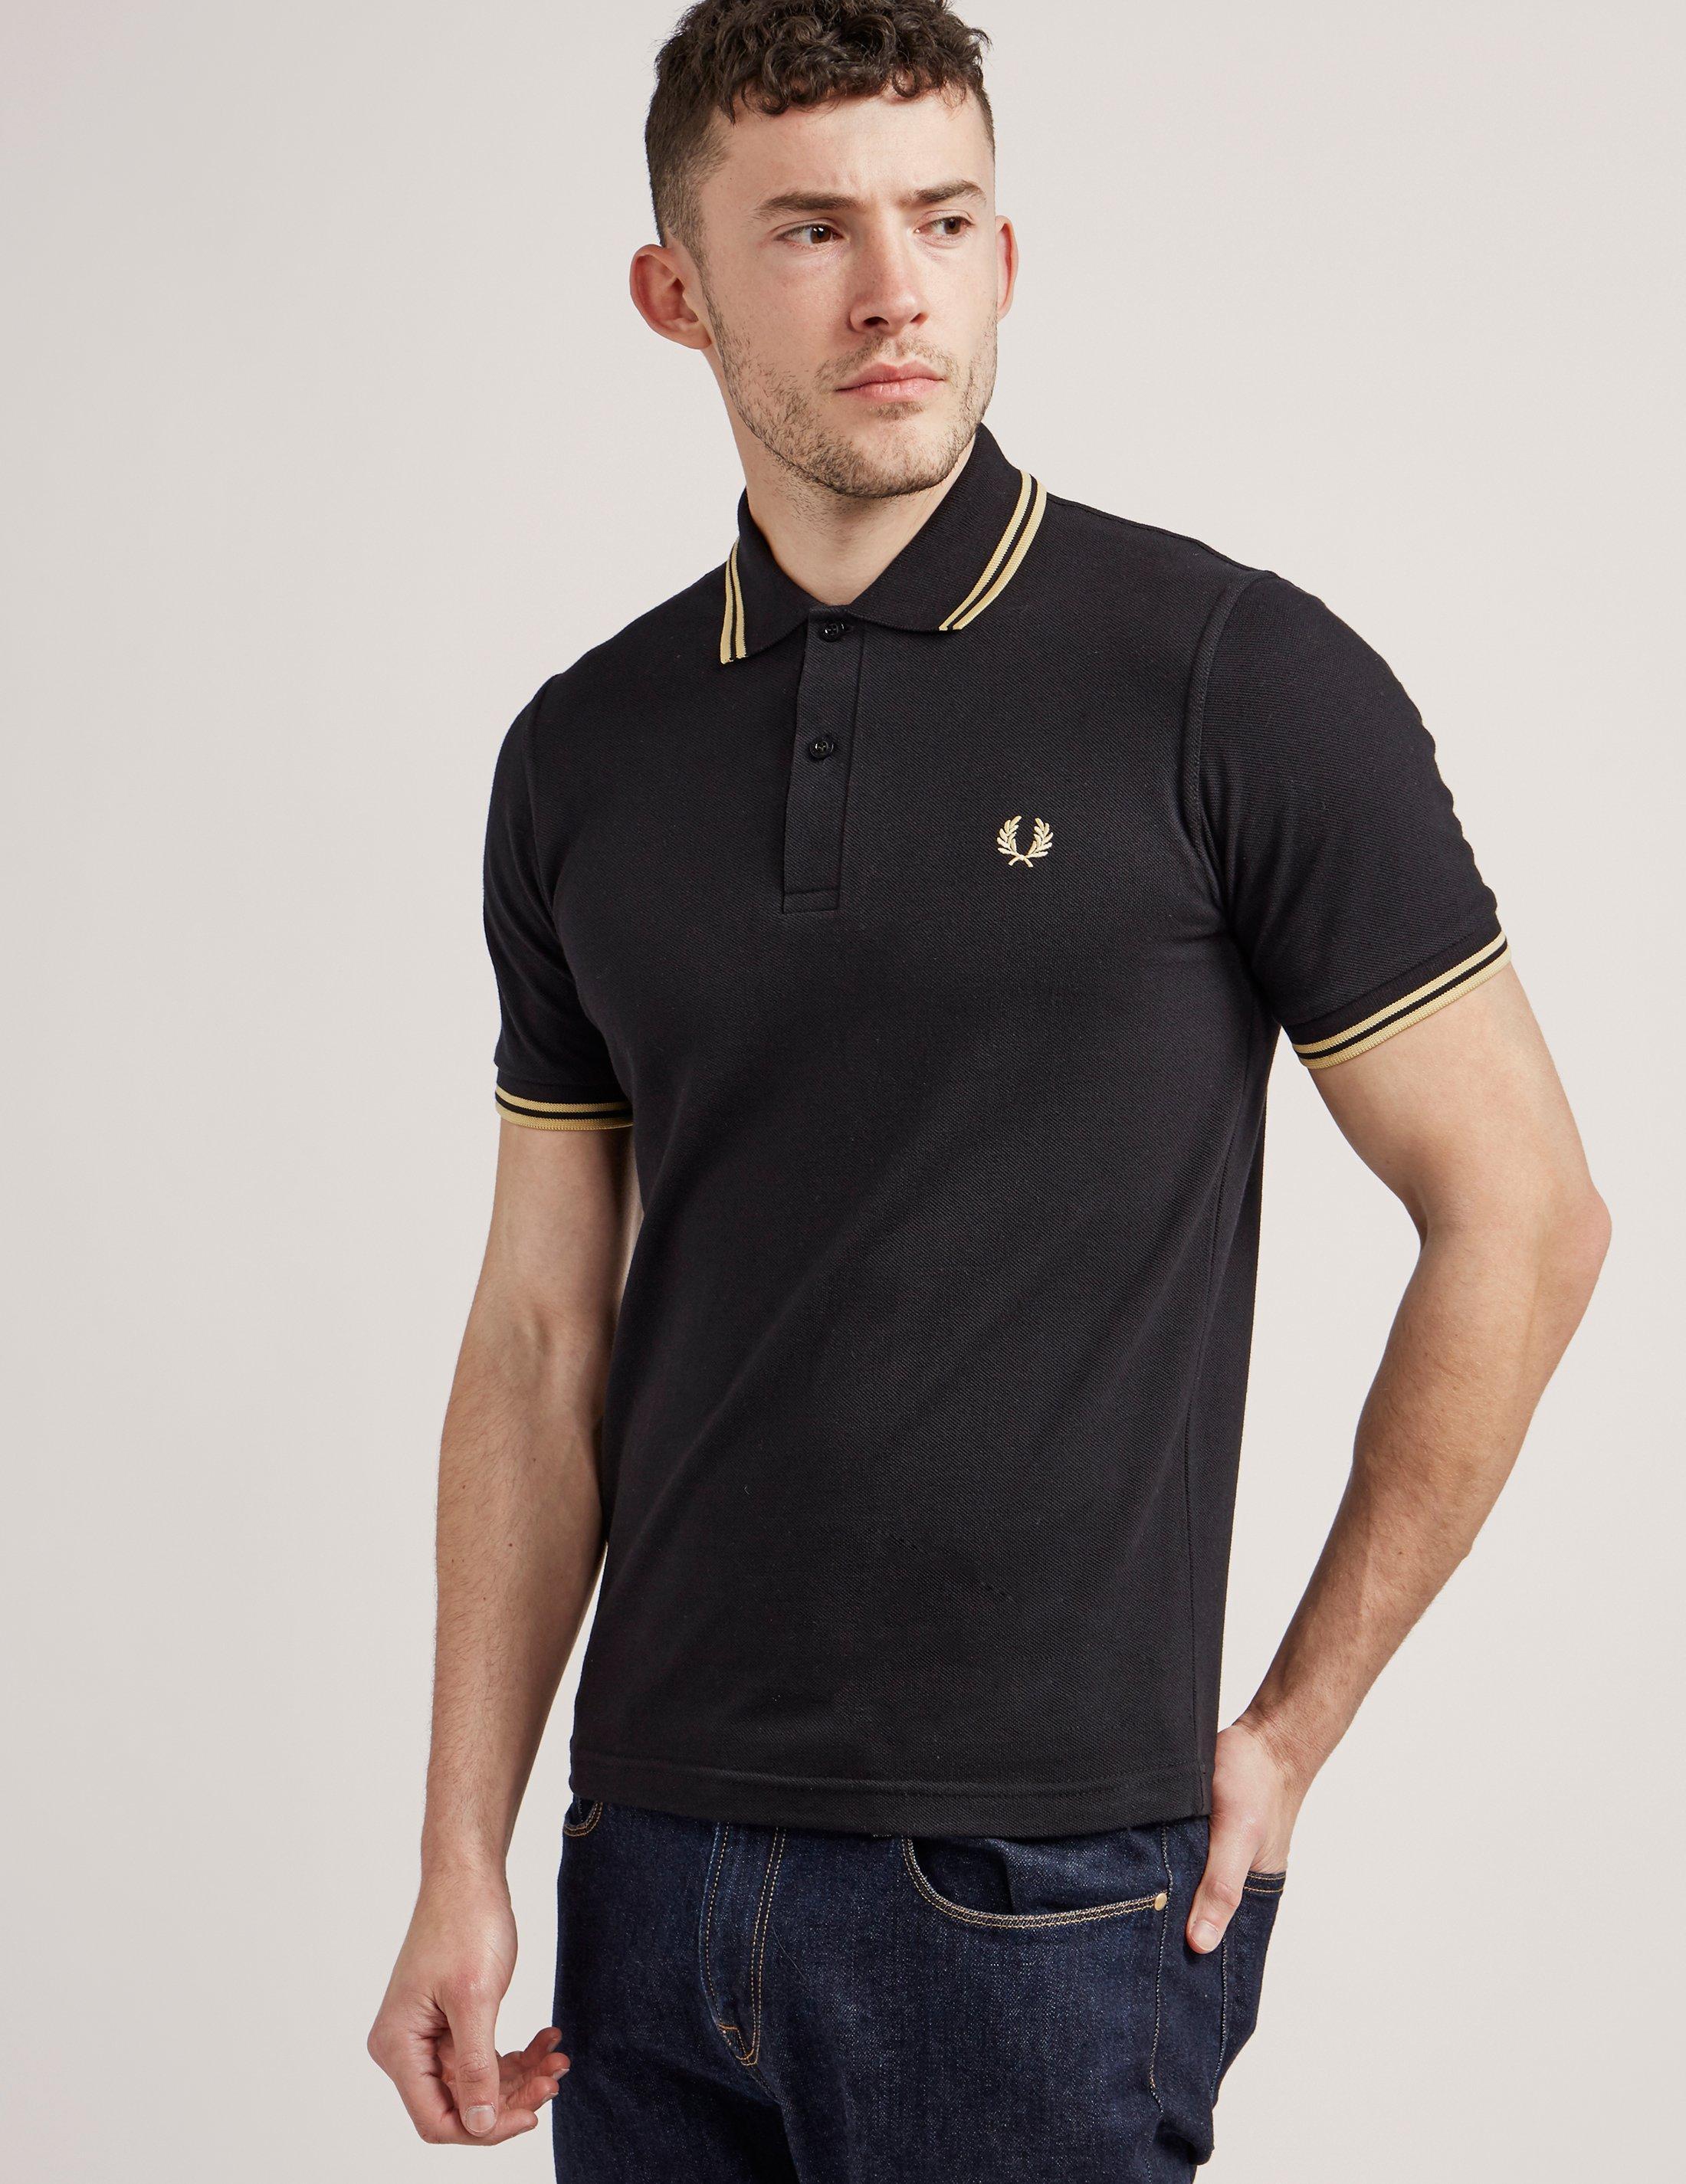 Black And Champagne Fred Perry Shop, 53% OFF | www.ingeniovirtual.com